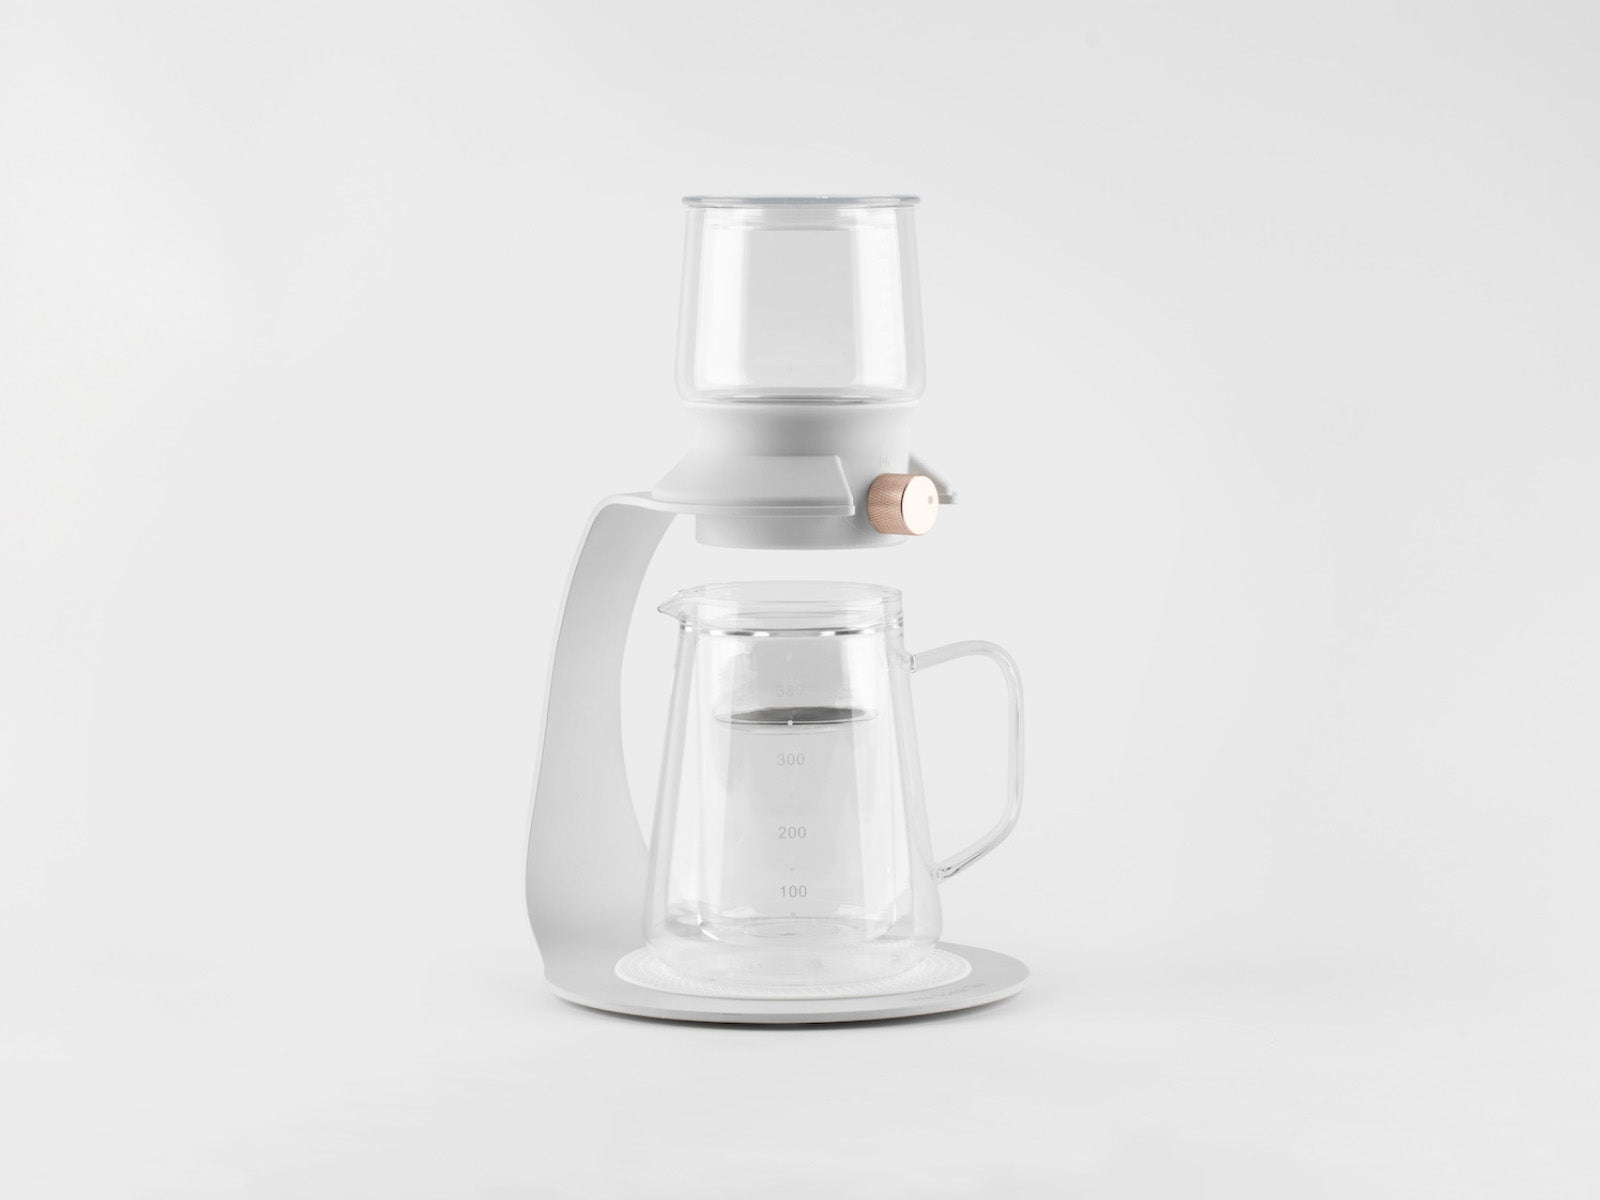 Sleek O2H TEA teapot designed for optimal steeping of both loose leaf and tea bags, showcasing modern elegance and brewing functionality.